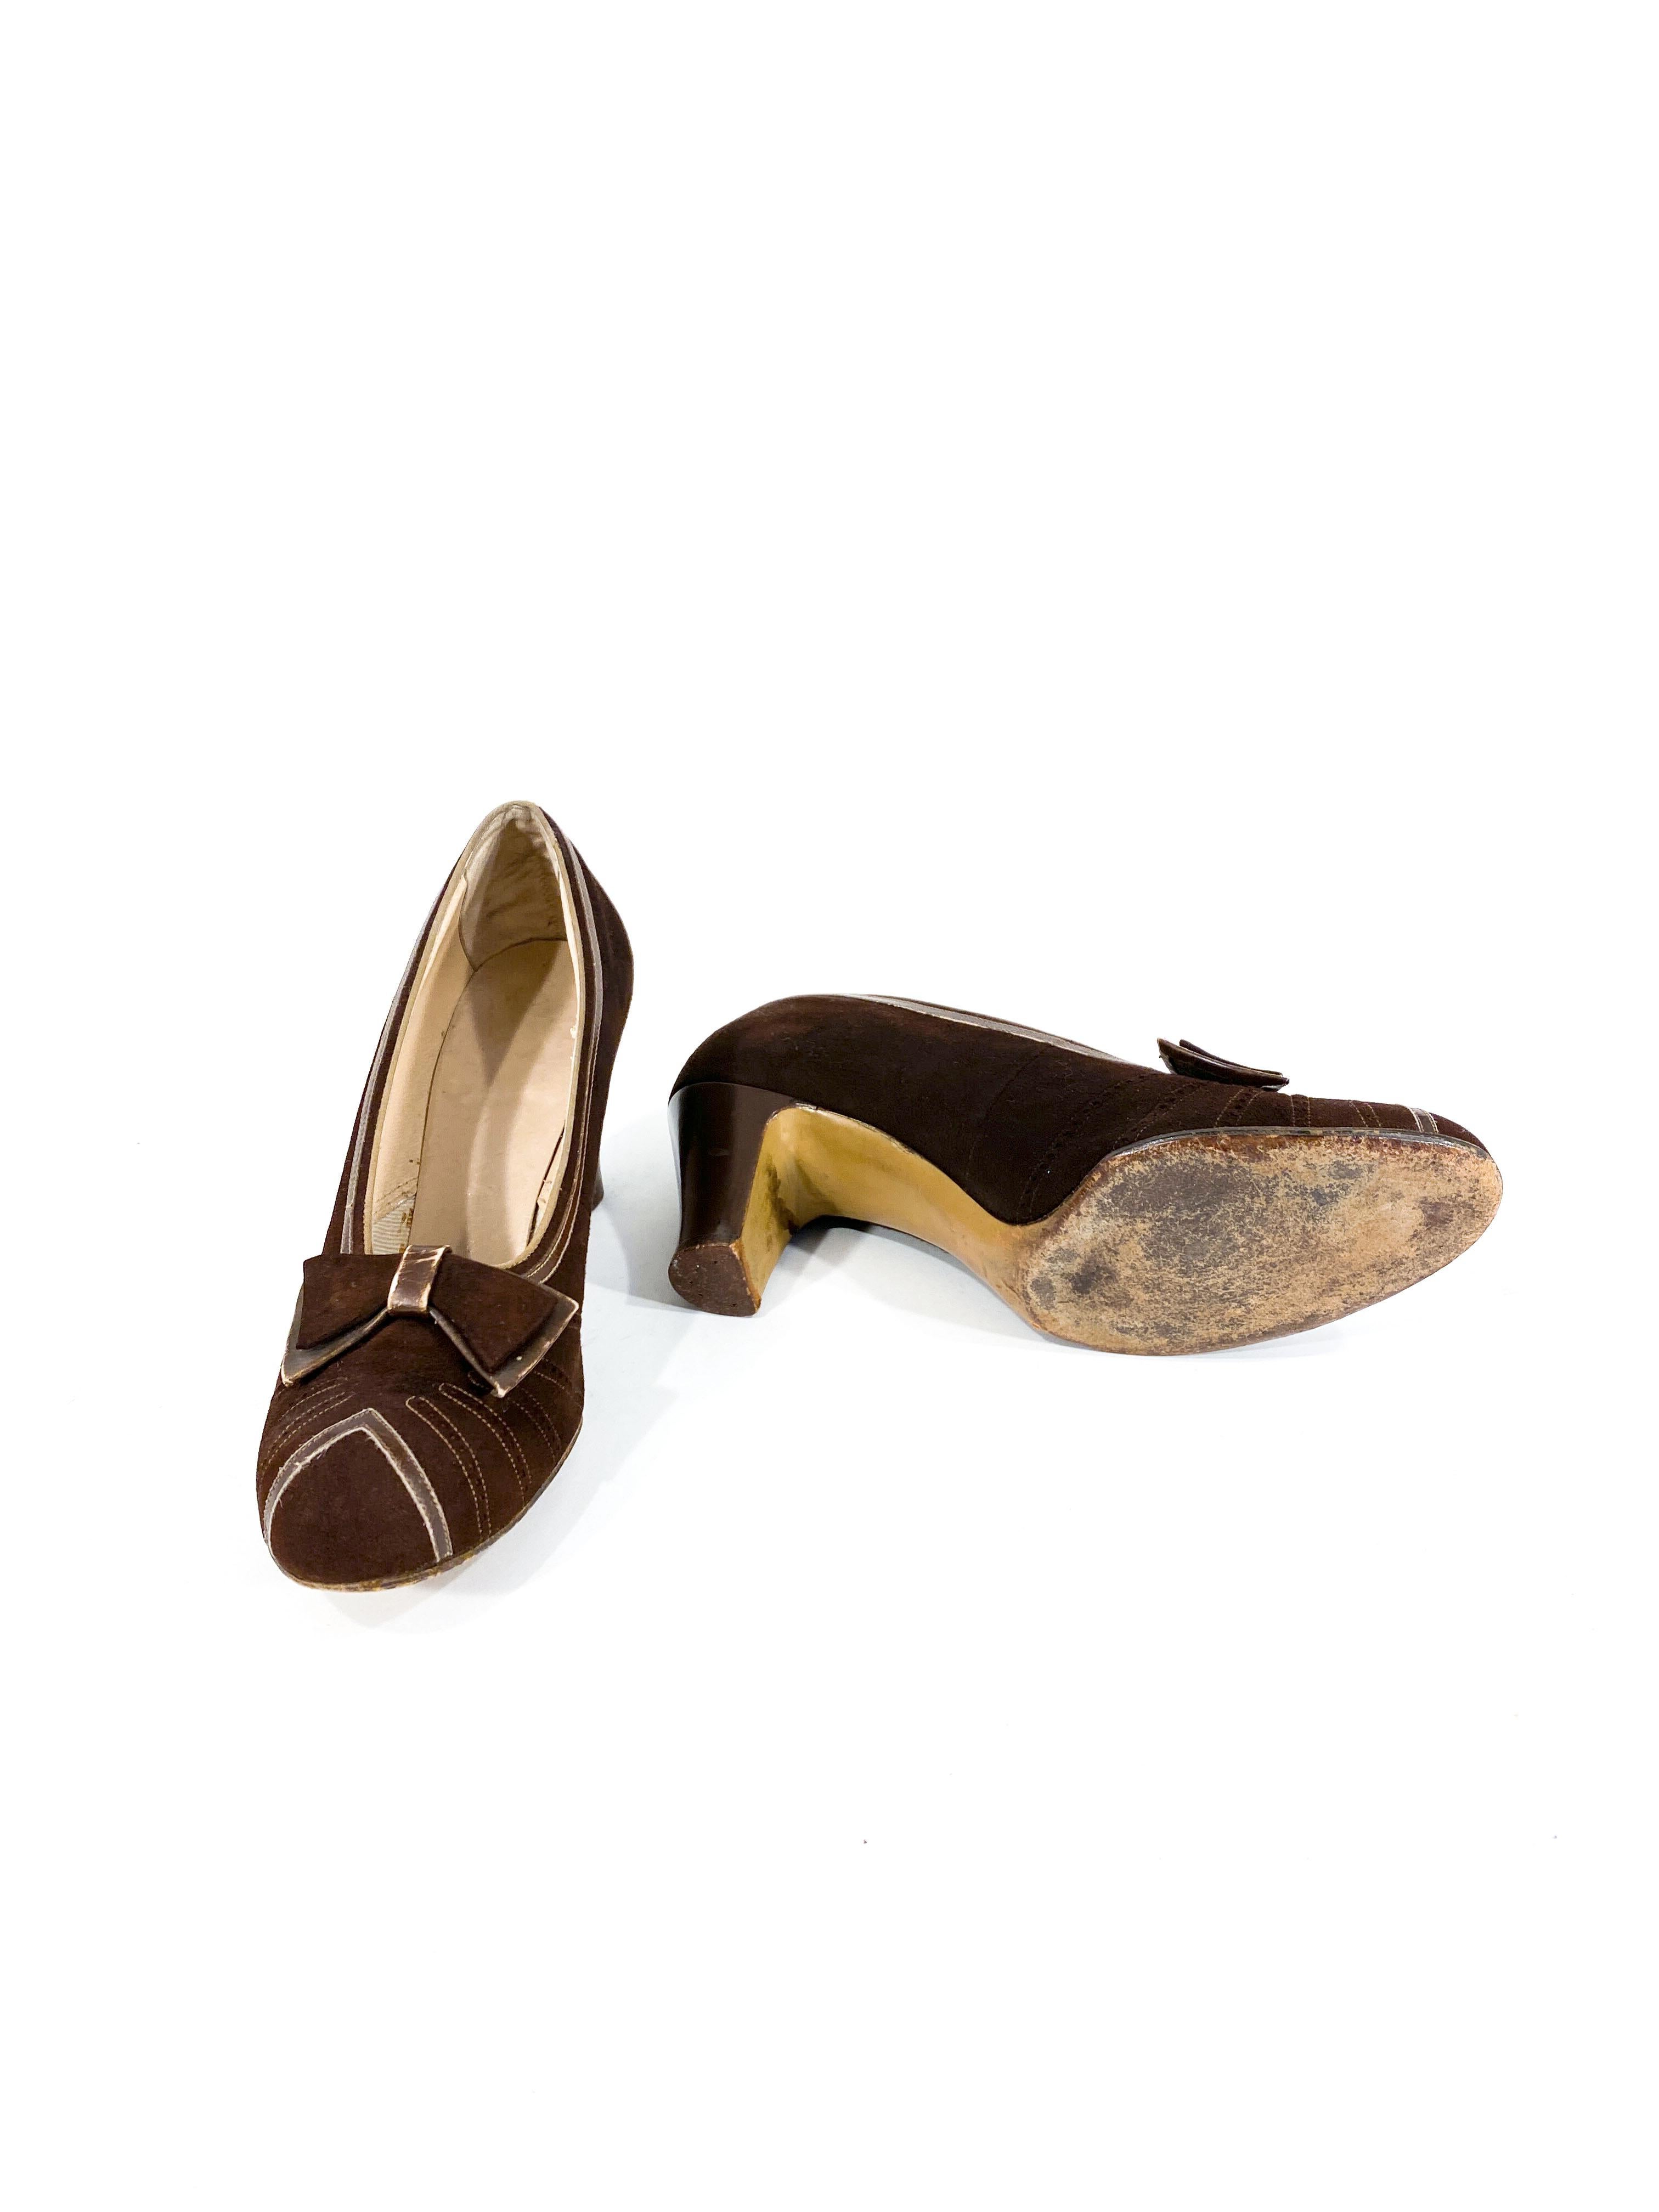 Women's or Men's 1930s Art Deco Brown Suede and leather Heels For Sale